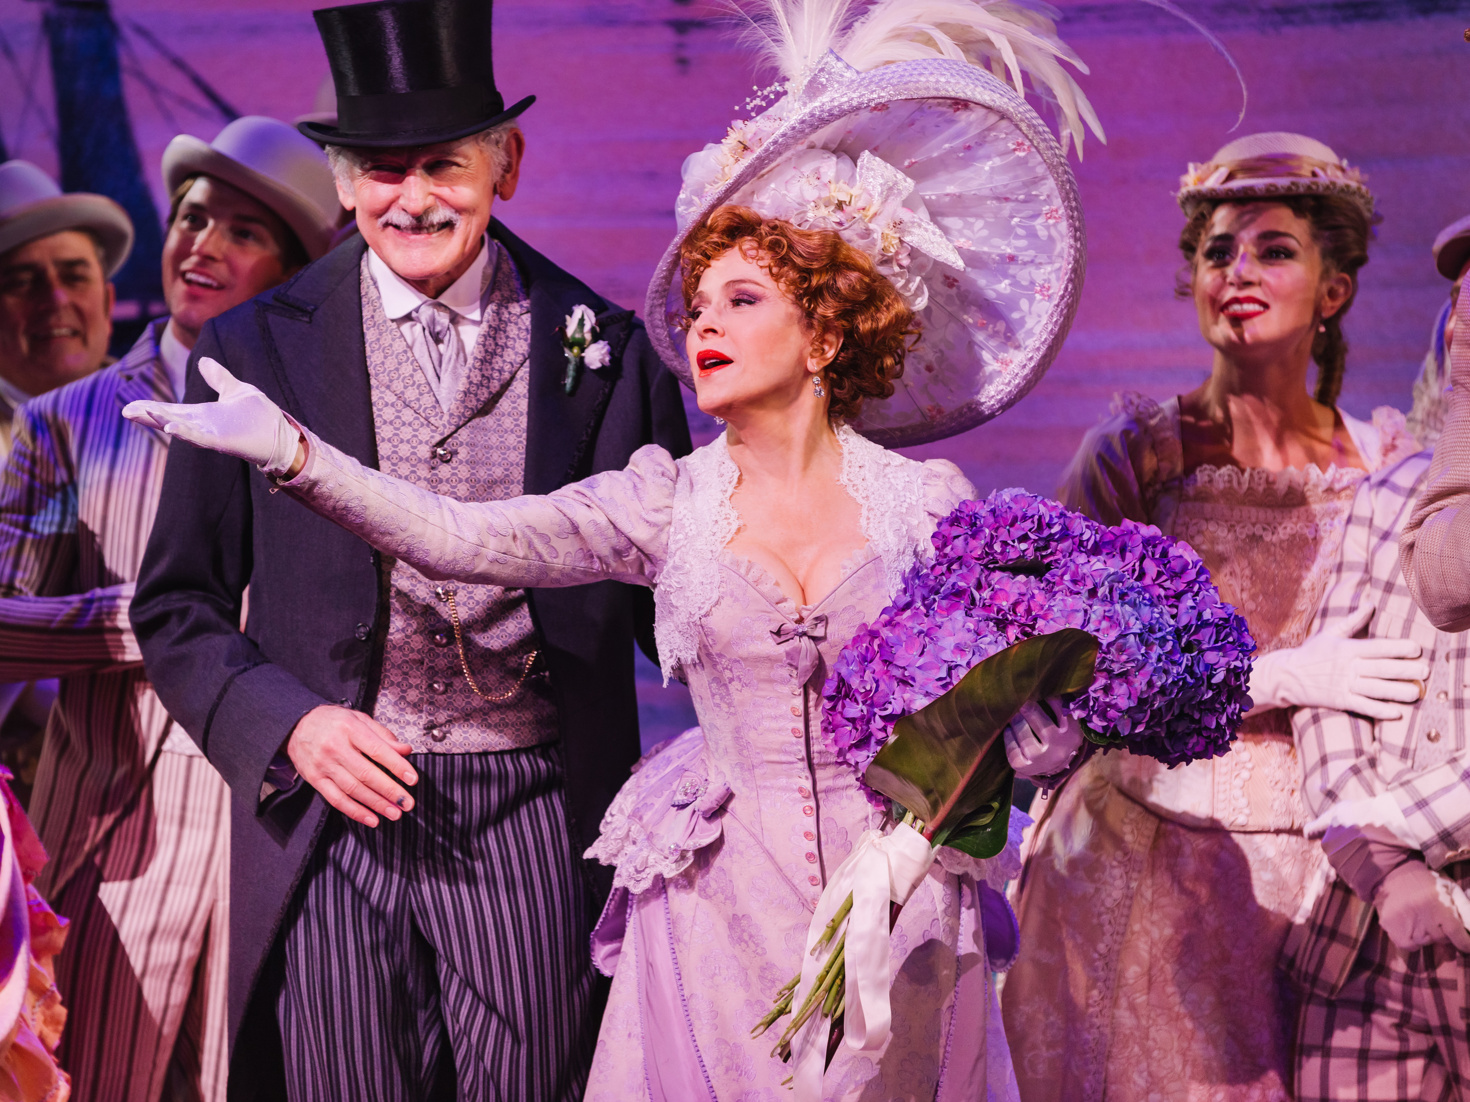 Victor Garber, Bernadette Peters & the cast of "Hello, Dolly!"...